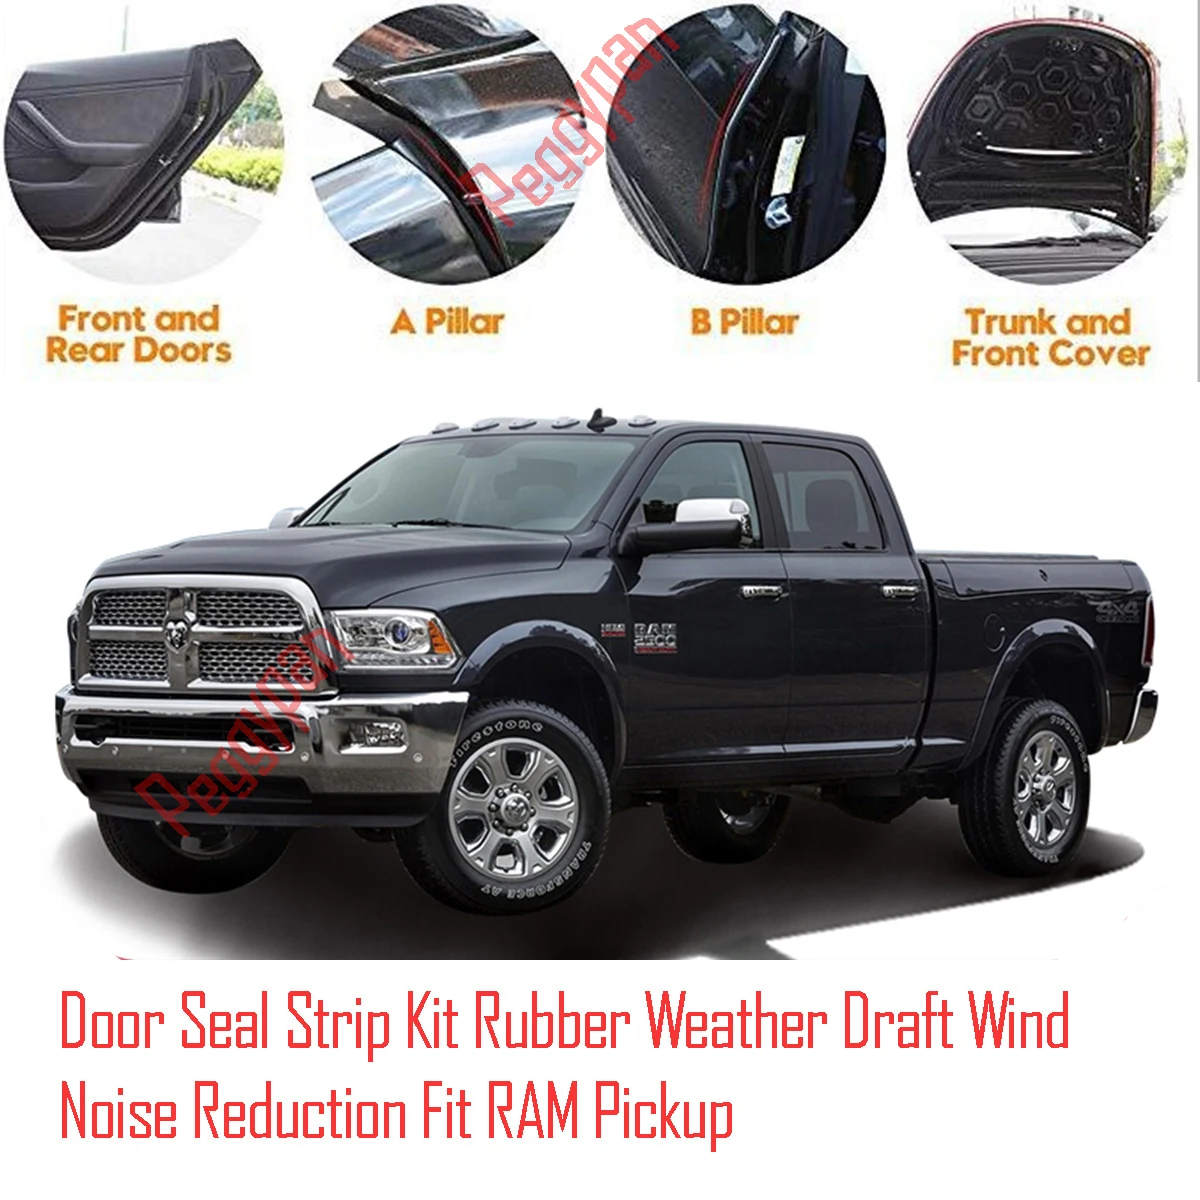 door-seal-strip-kit-self-adhesive-window-engine-cover-soundproof-rubber-weather-draft-wind-noise-reduction-fit-for-ram-pickup